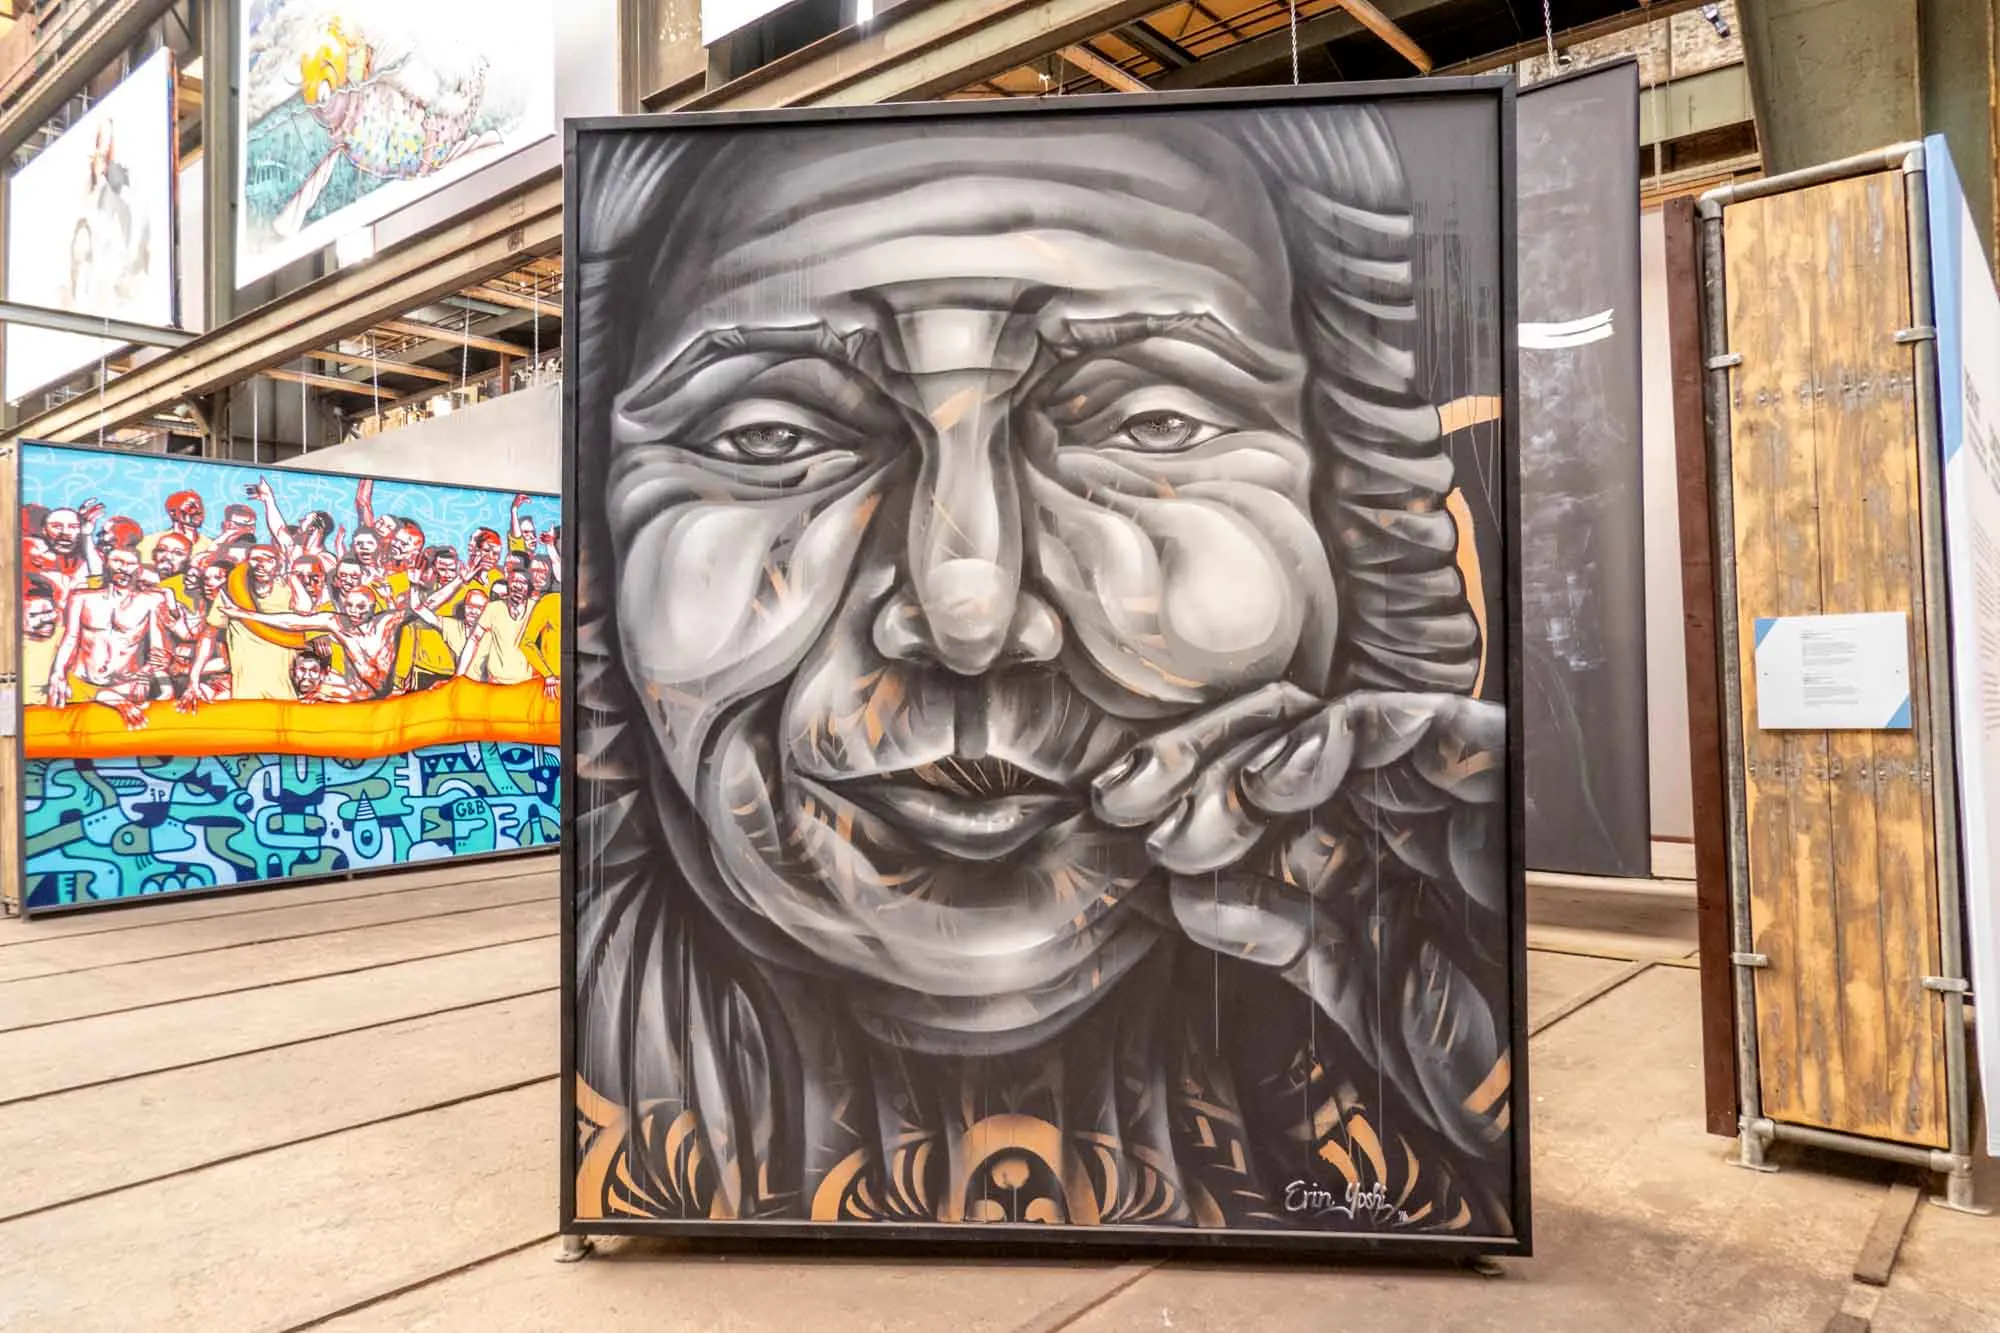 Mural of old person with wrinkles